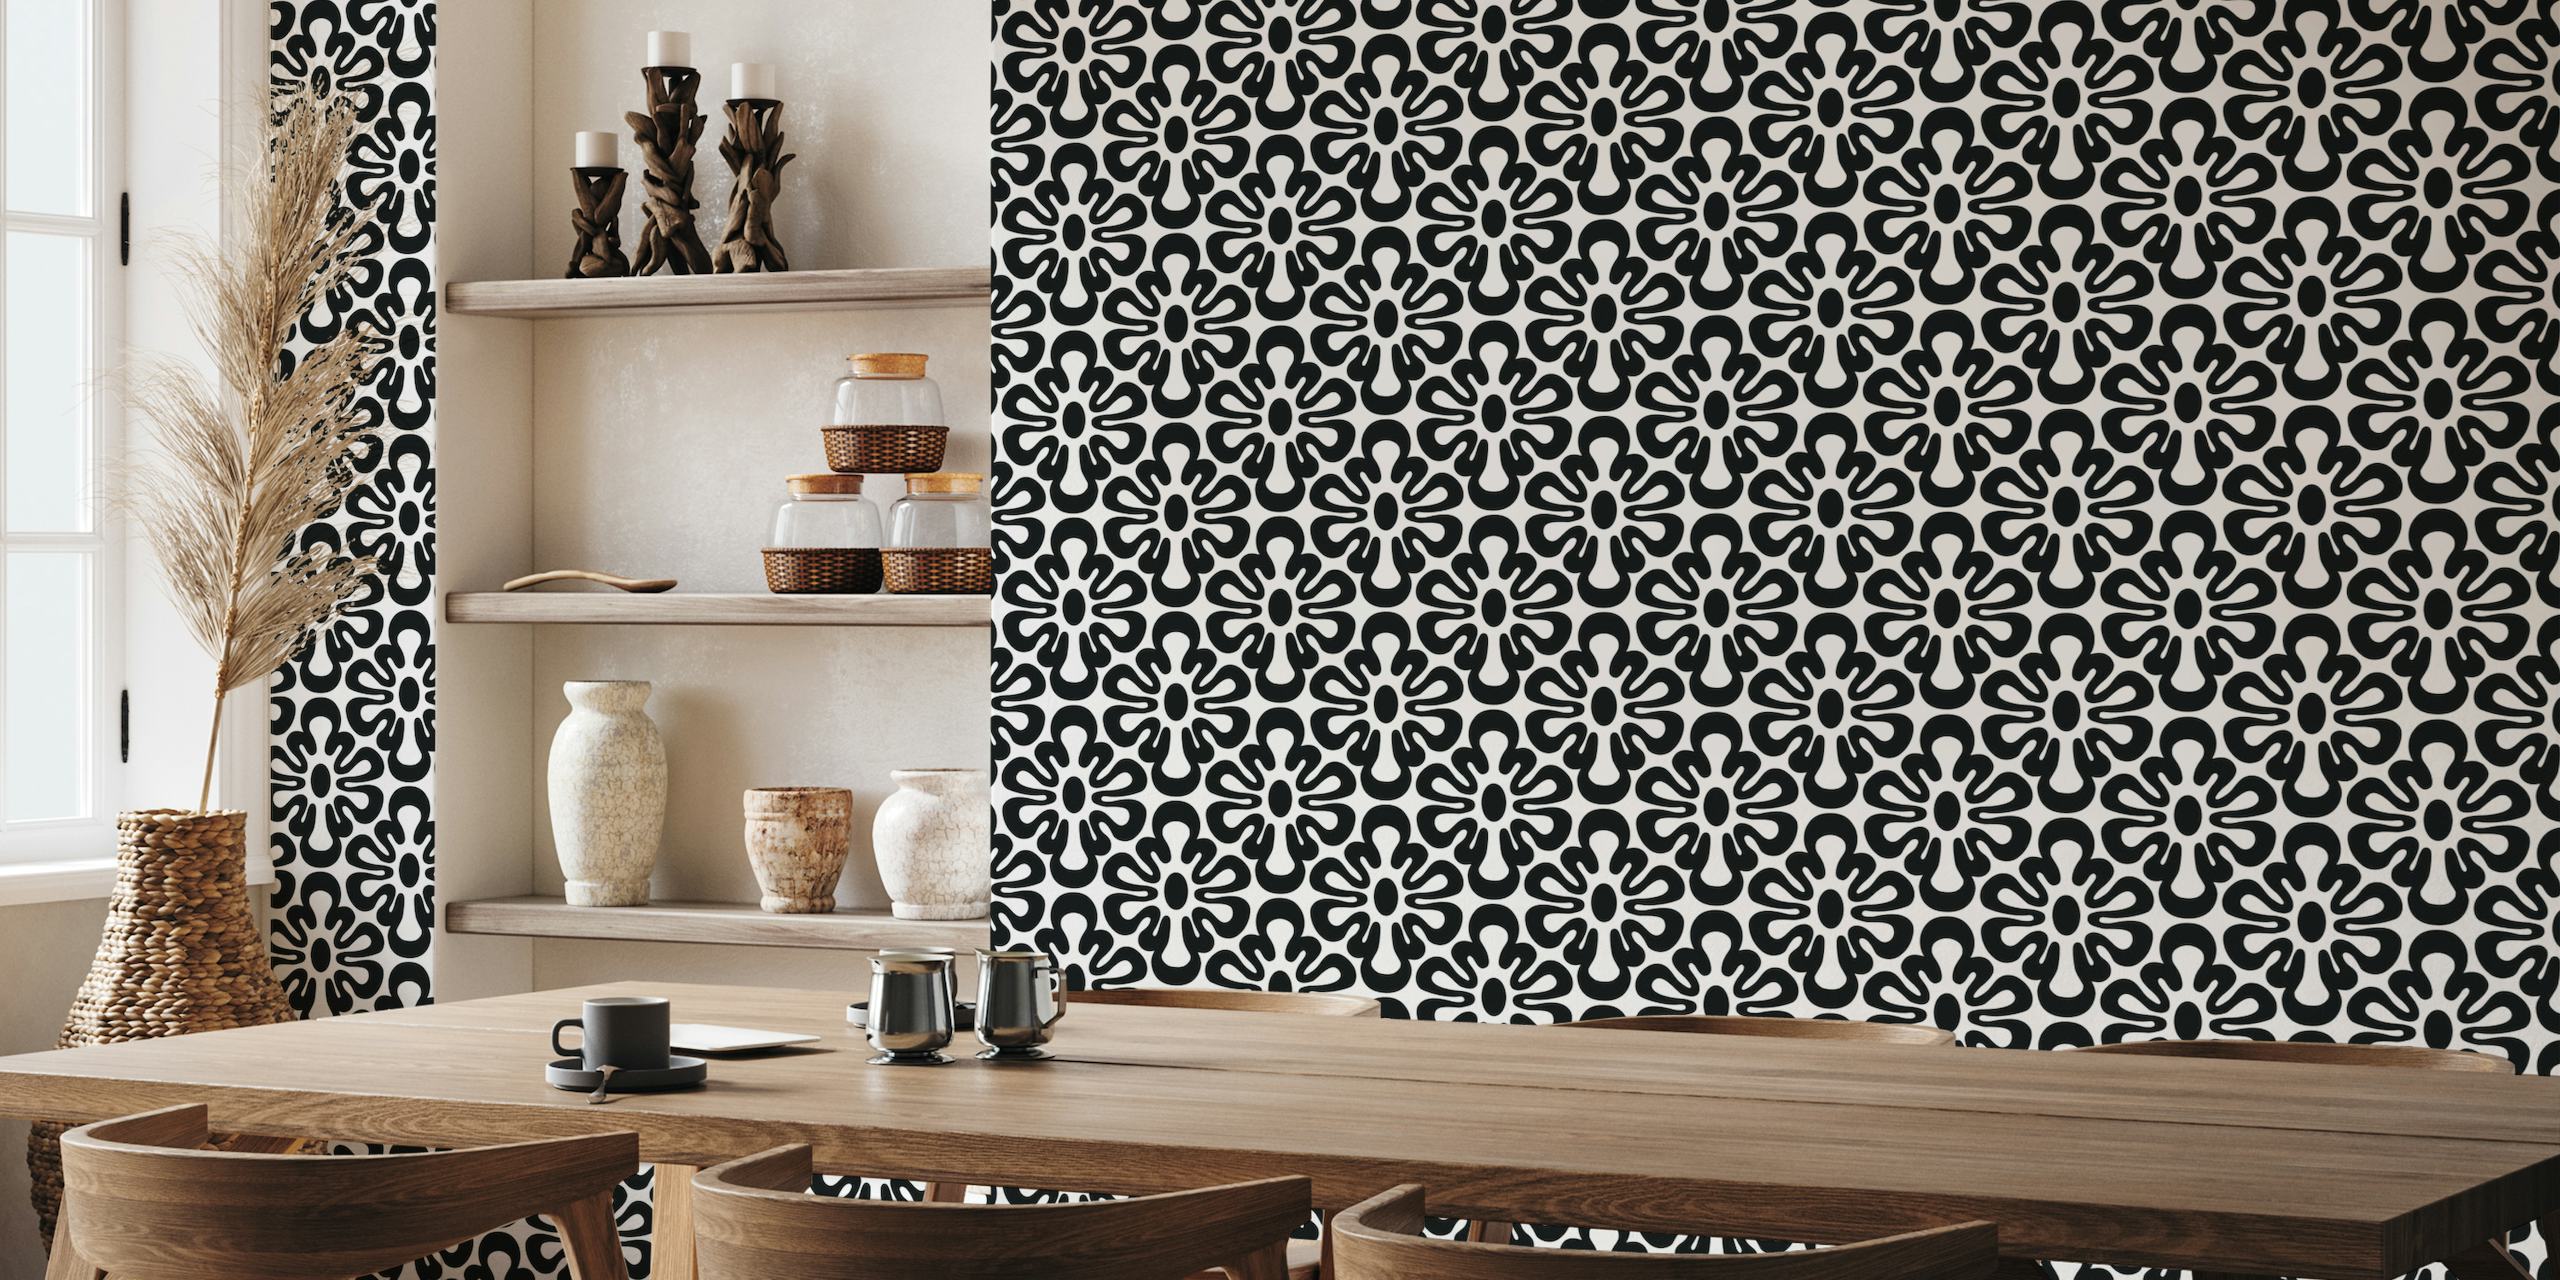 2625 D - abstract shapes pattern, black and white behang